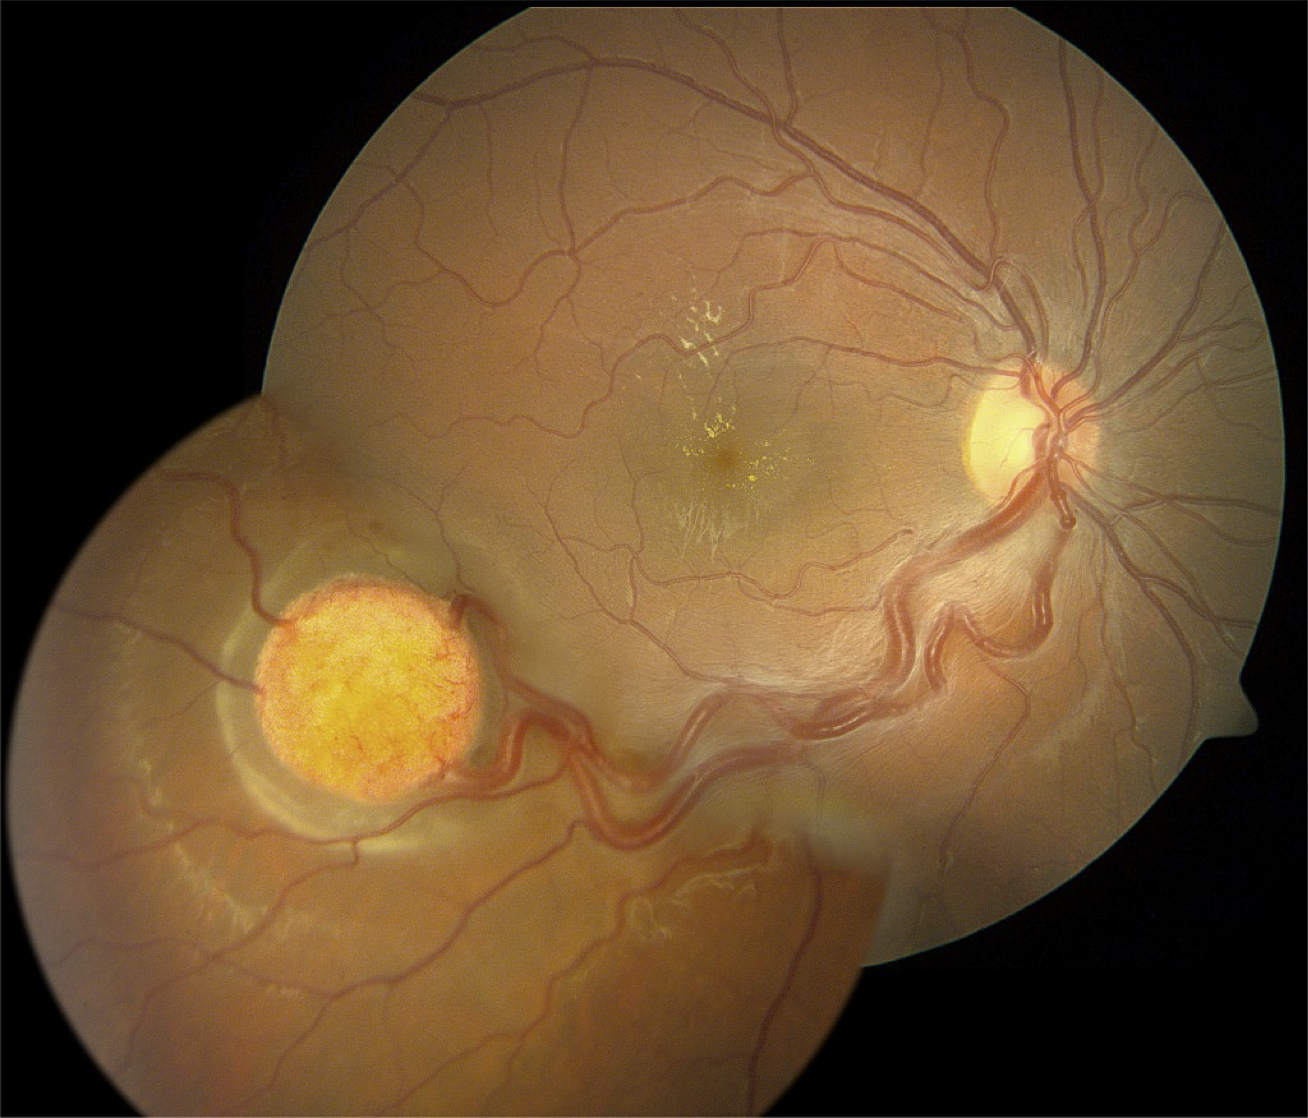 Right eye with inferior temporal solitary retinal capillary hemangioma with feeder vessels and secondary macular exudation.